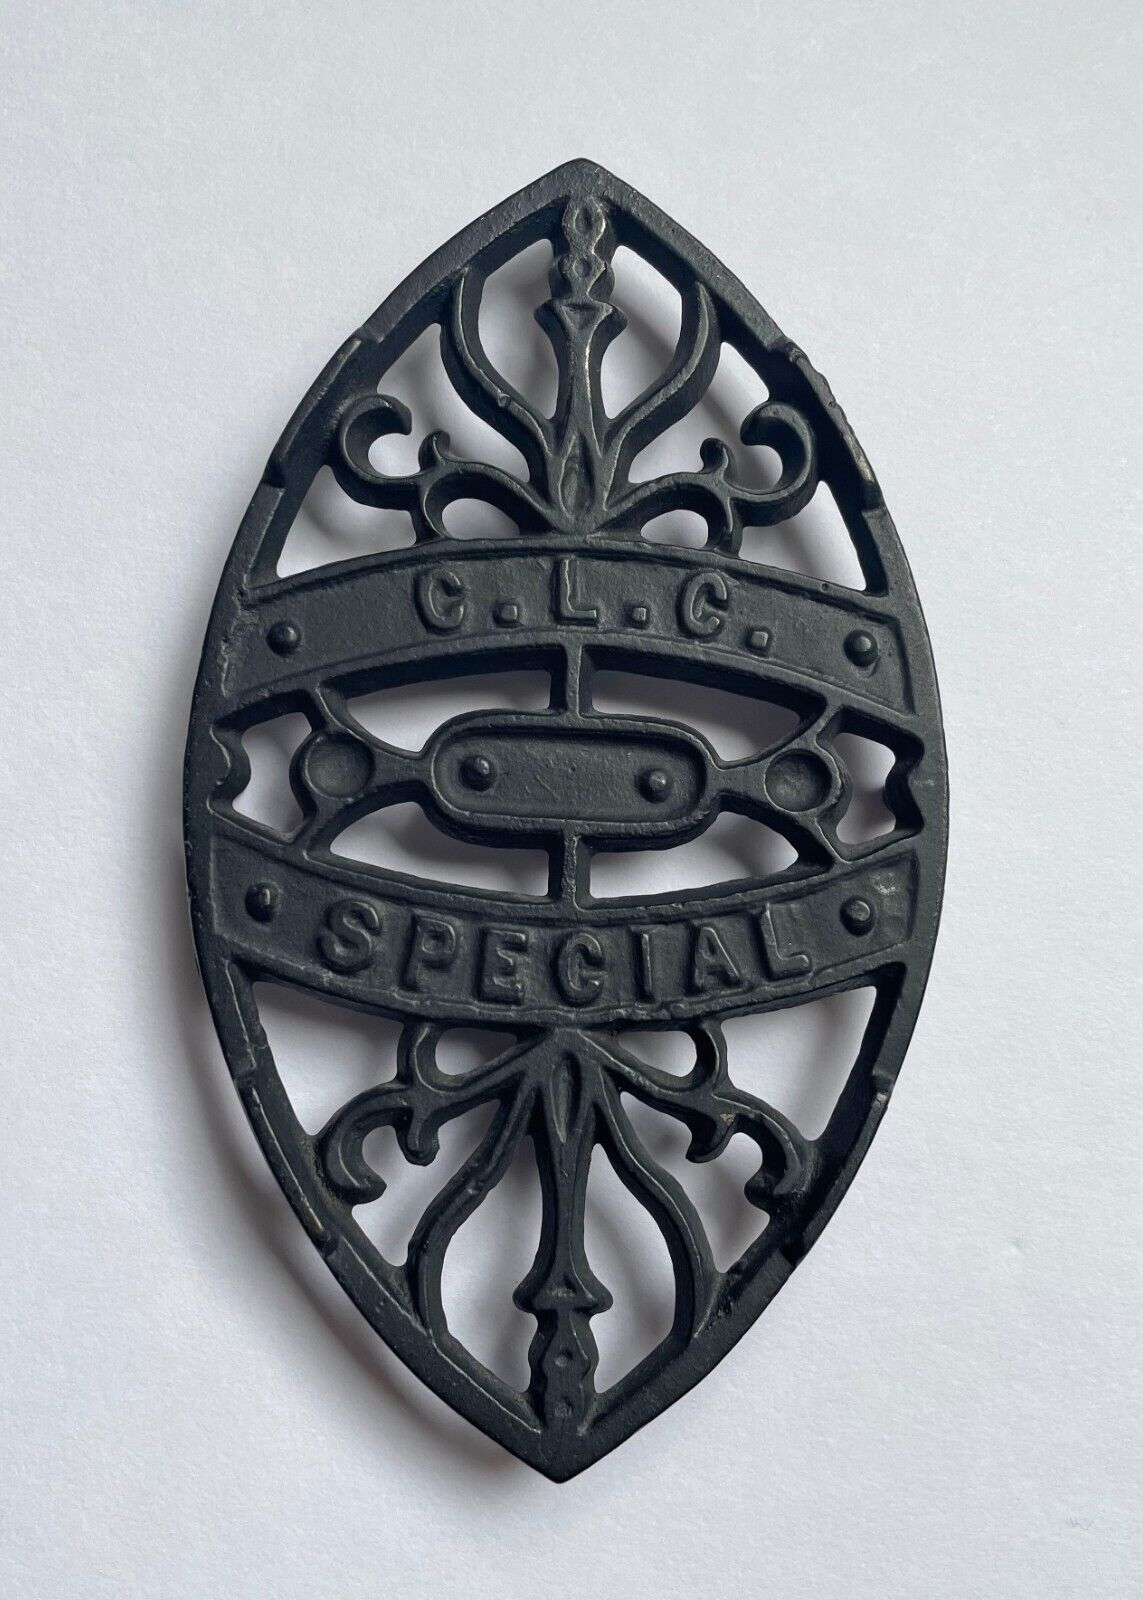 Vintage C.L.C. SPECIAL Footed CAST IRON TRIVET Stand Sad Iron